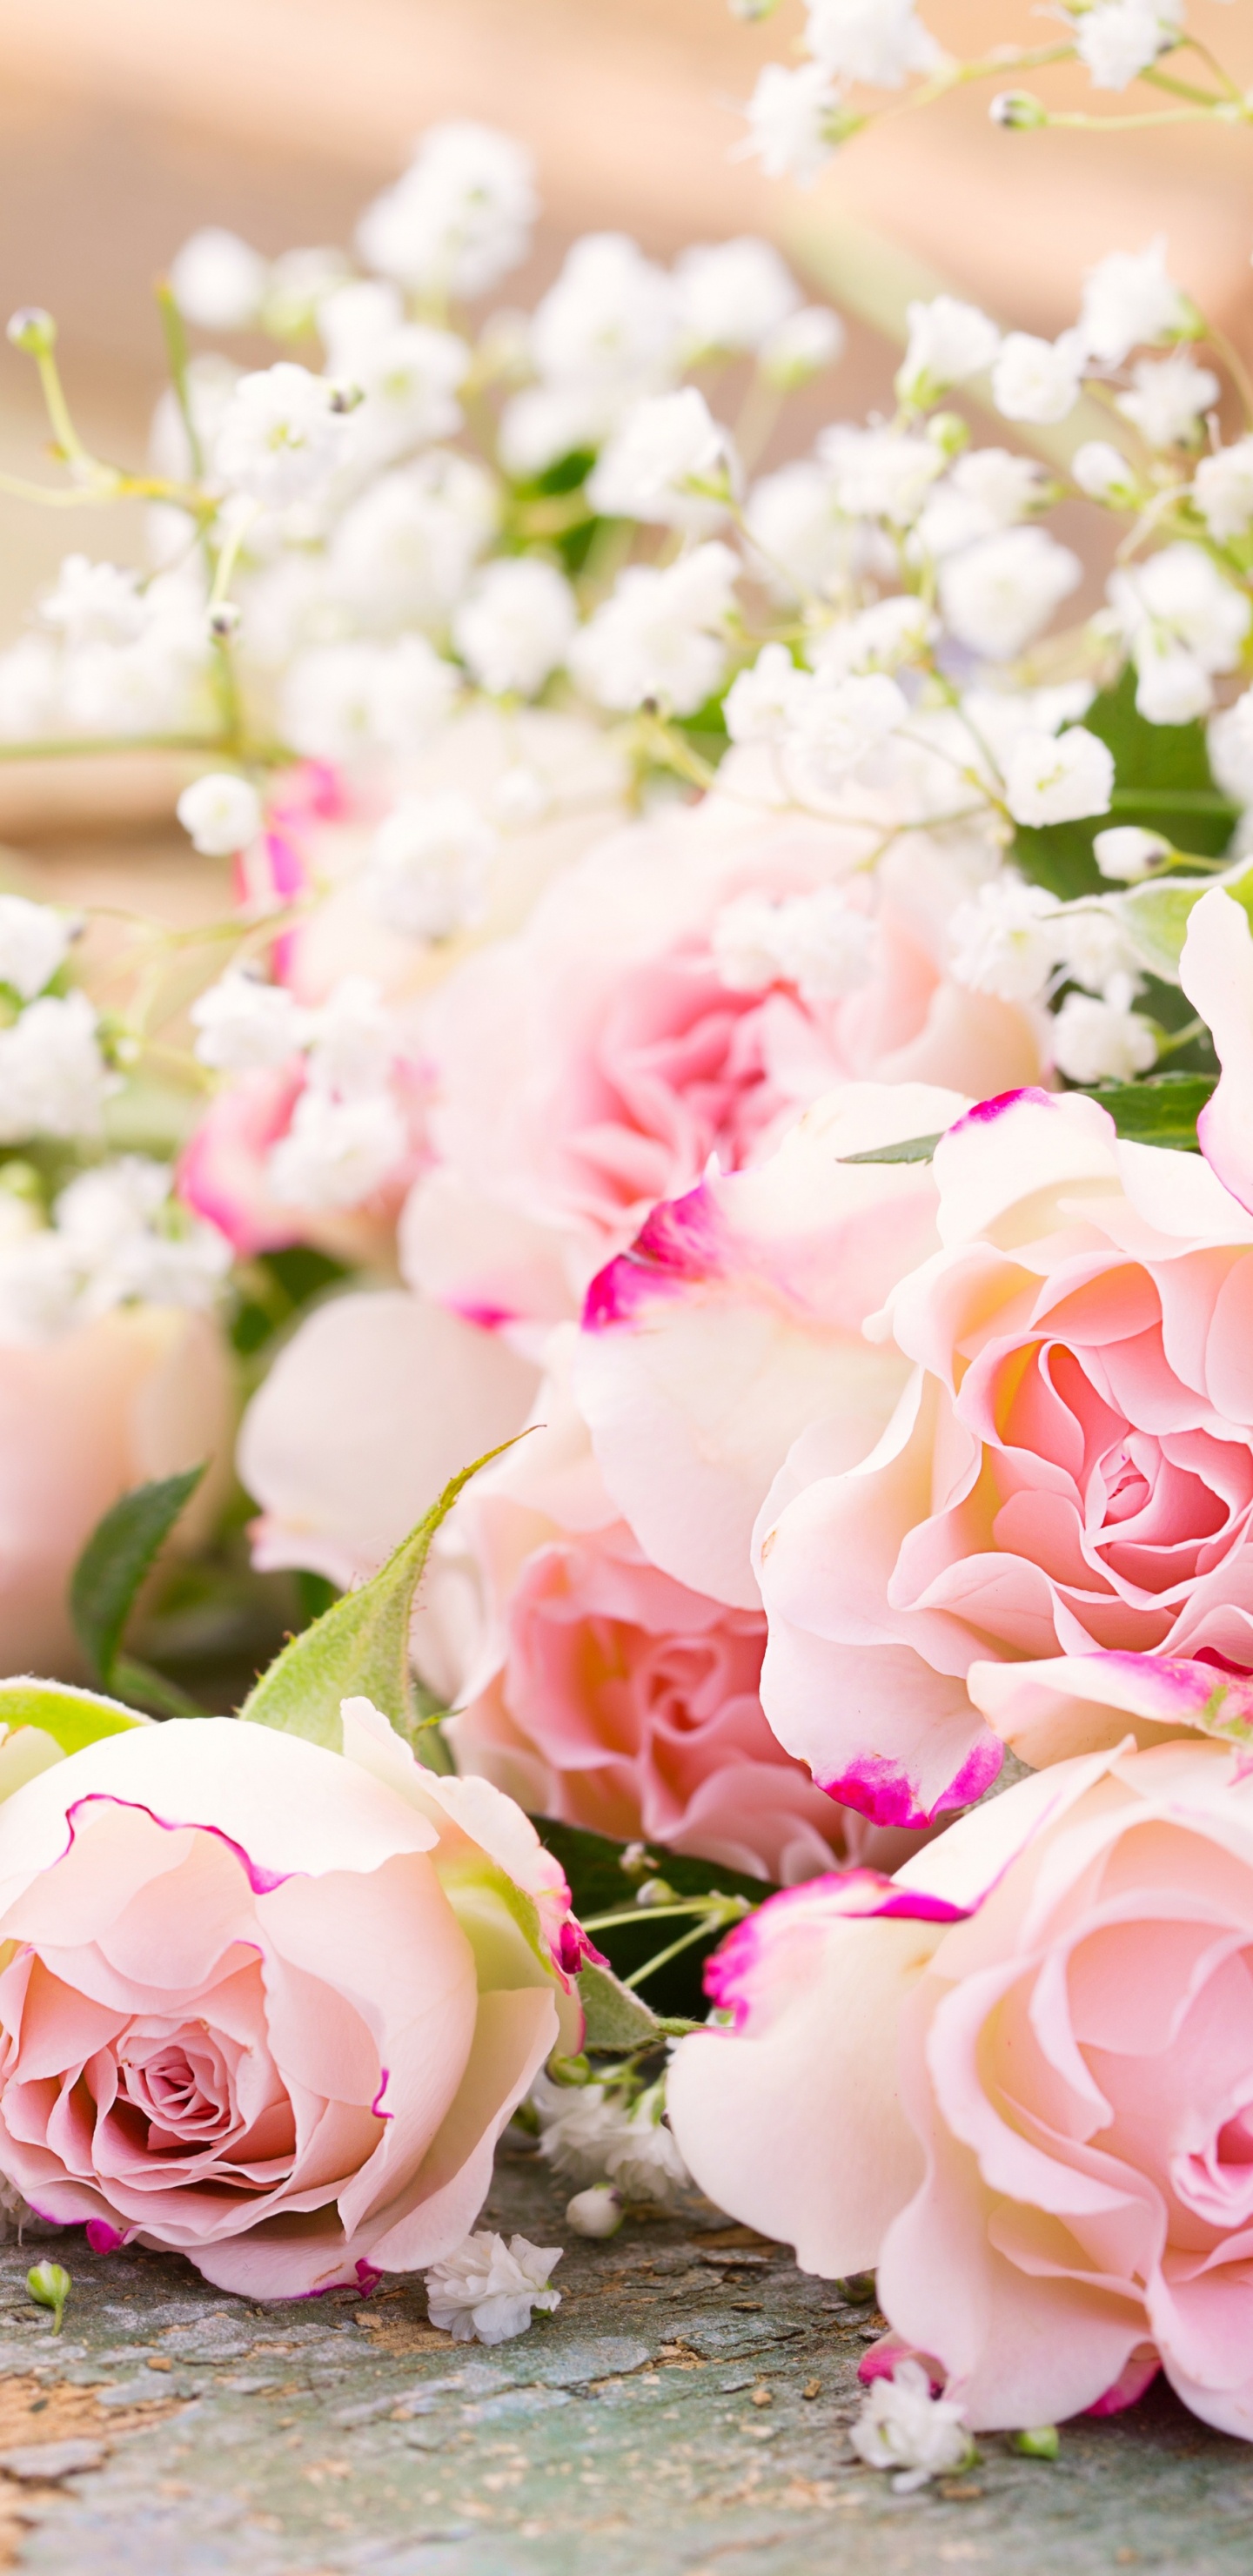 Bouquet de Roses Roses et Blanches. Wallpaper in 1440x2960 Resolution